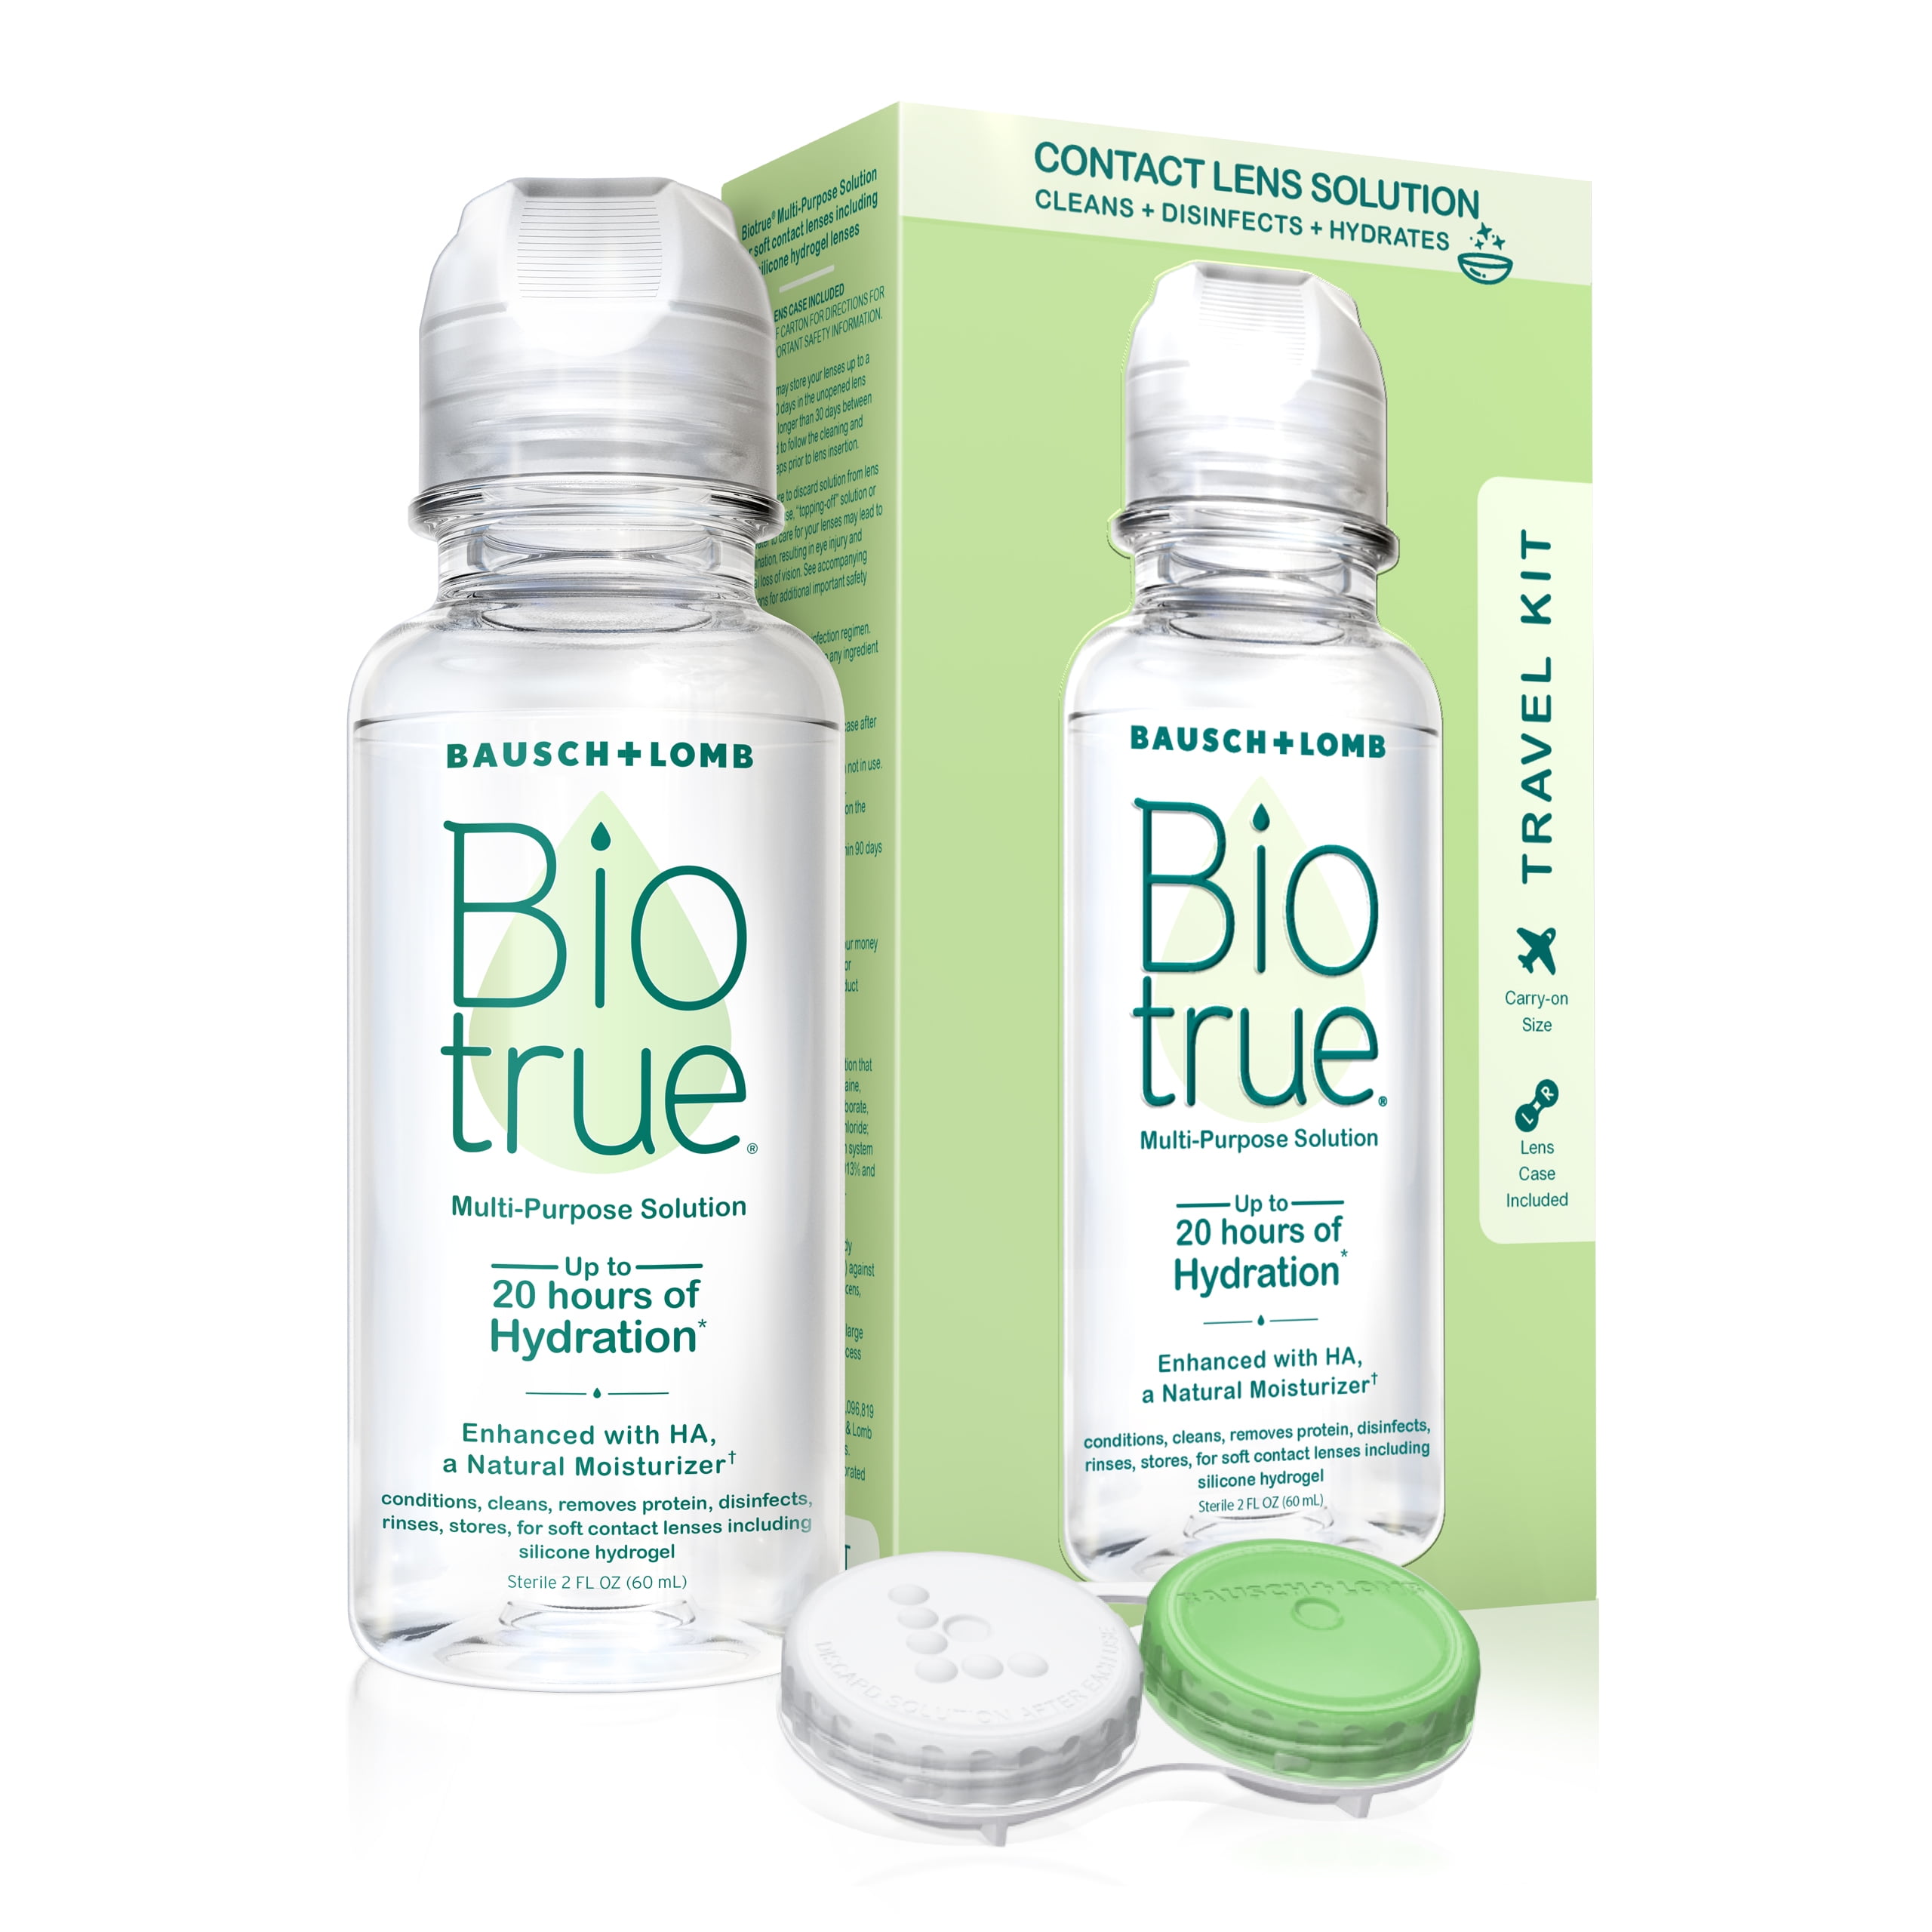 biotrue-multi-purpose-contact-lens-solution-from-bausch-lomb-2-fl-oz